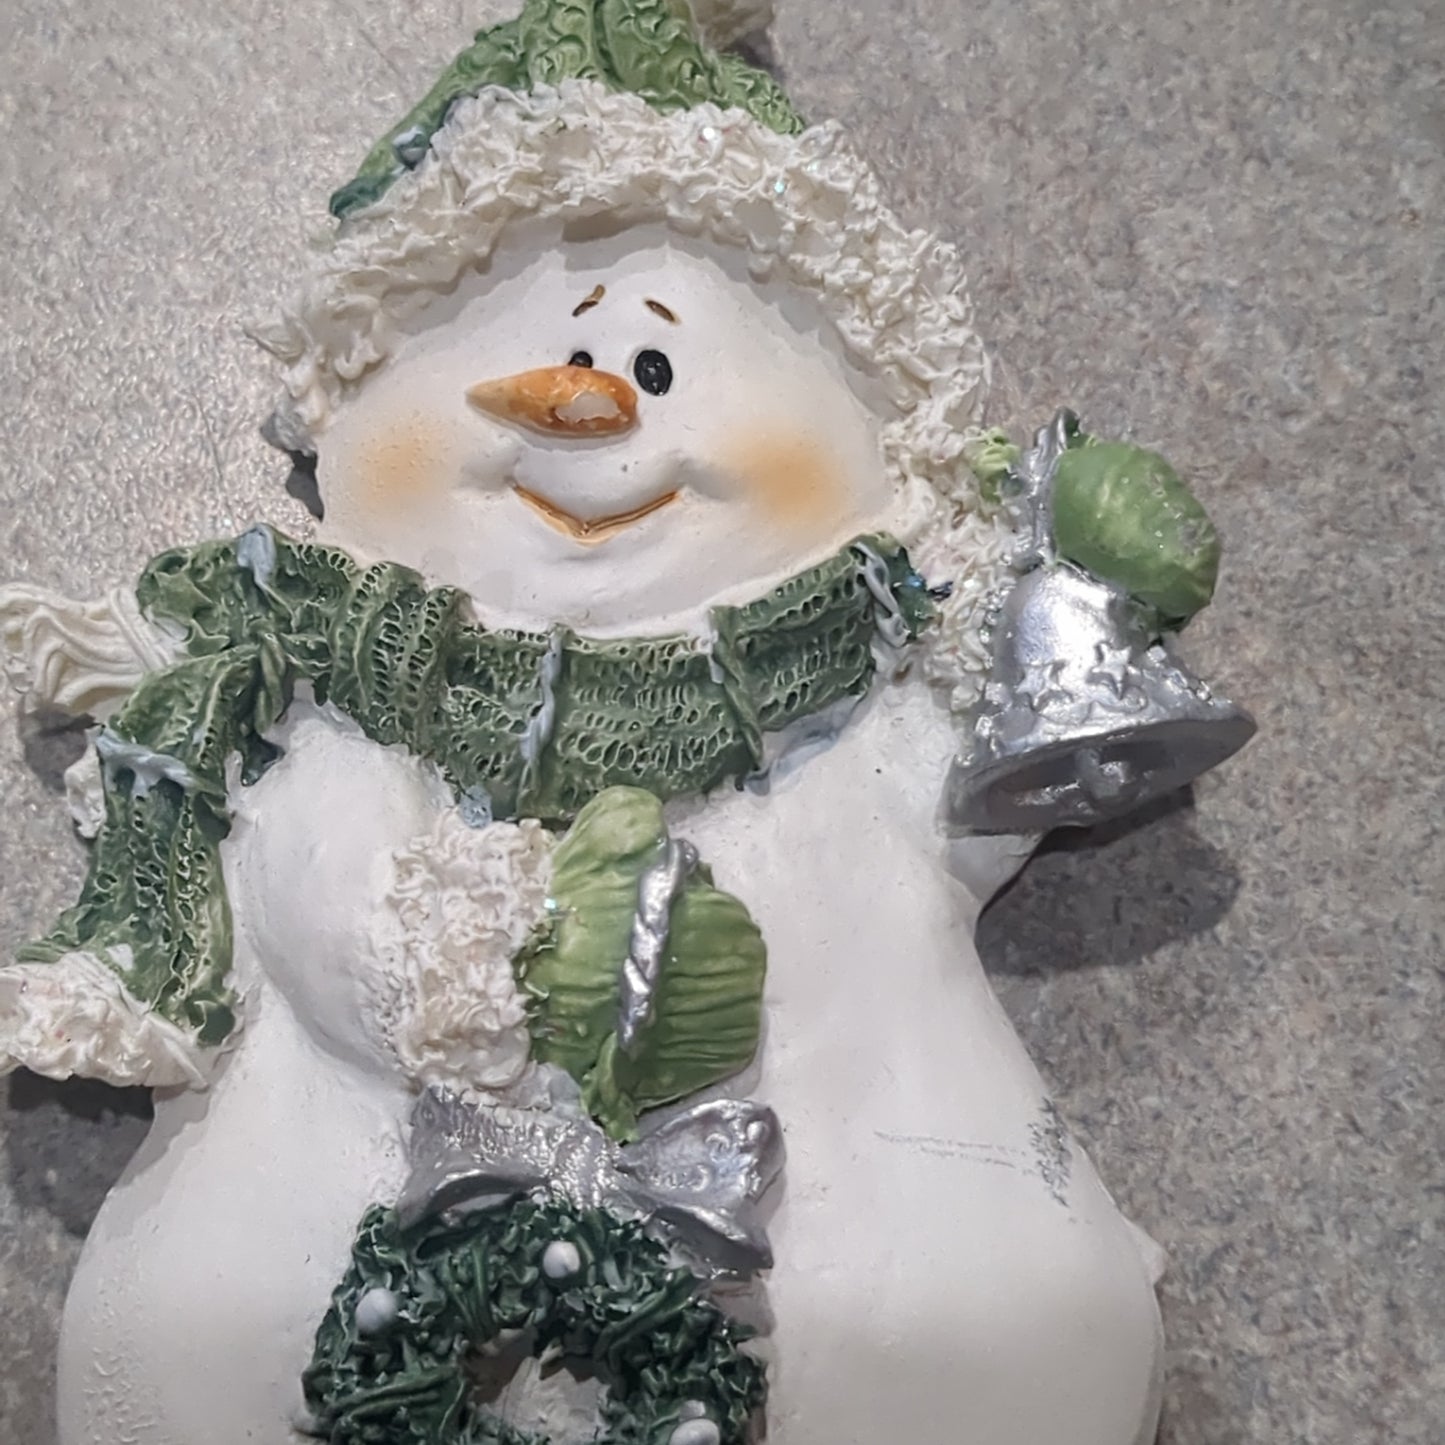 Polycrylic snowman ornament with bell & wreath